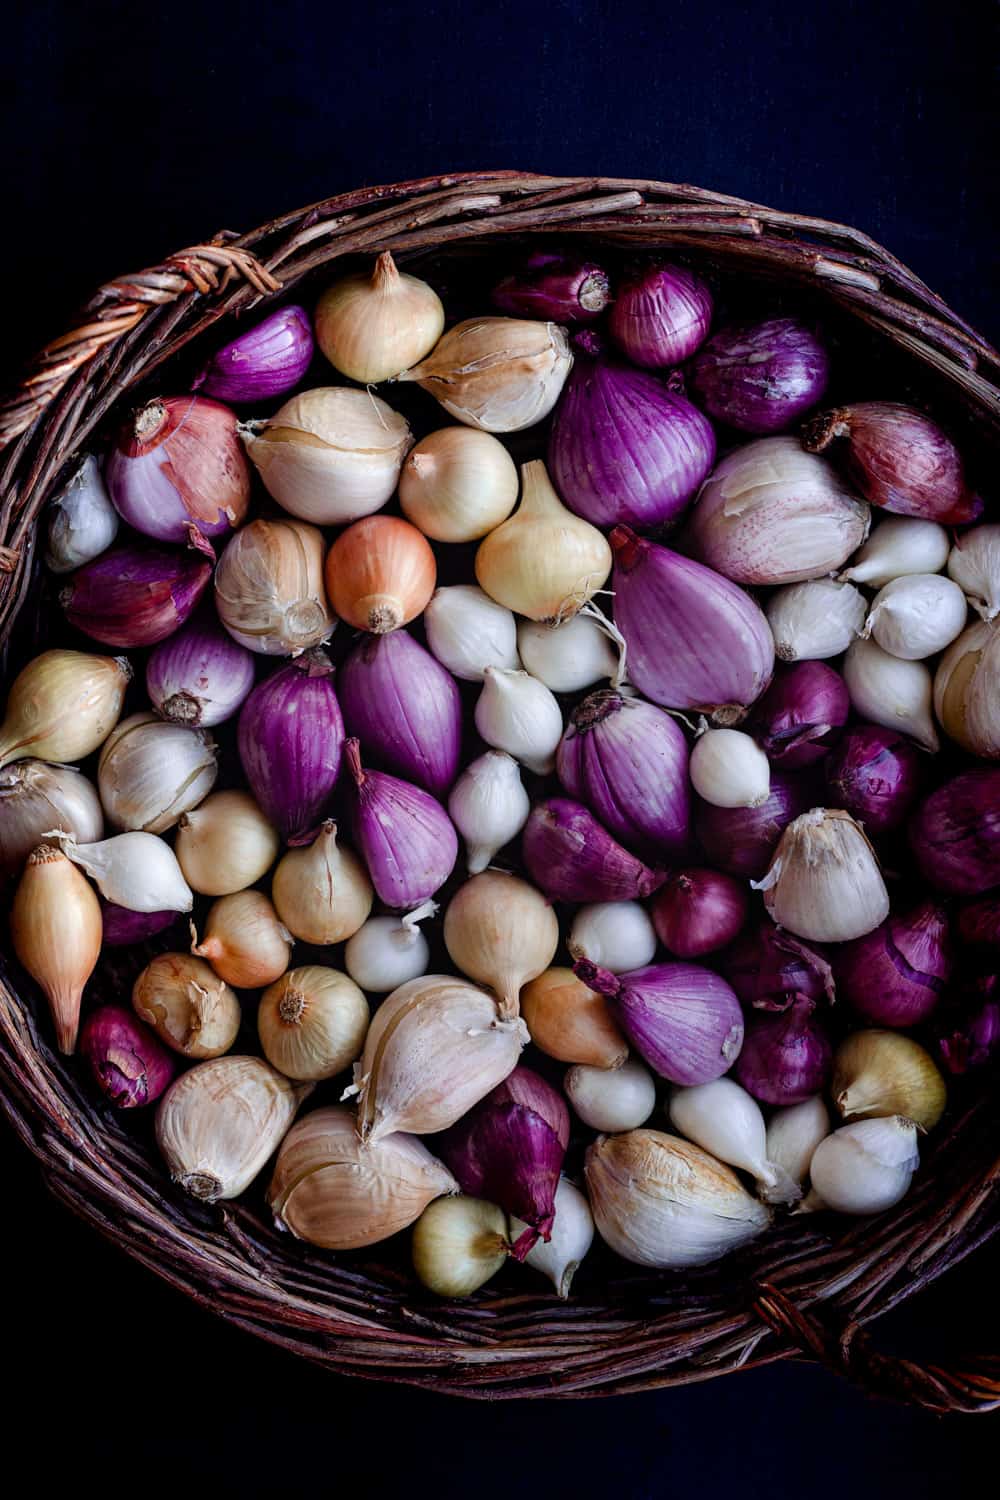 Raw purple shallots and little white and yellow onions in a basket on a dark background.